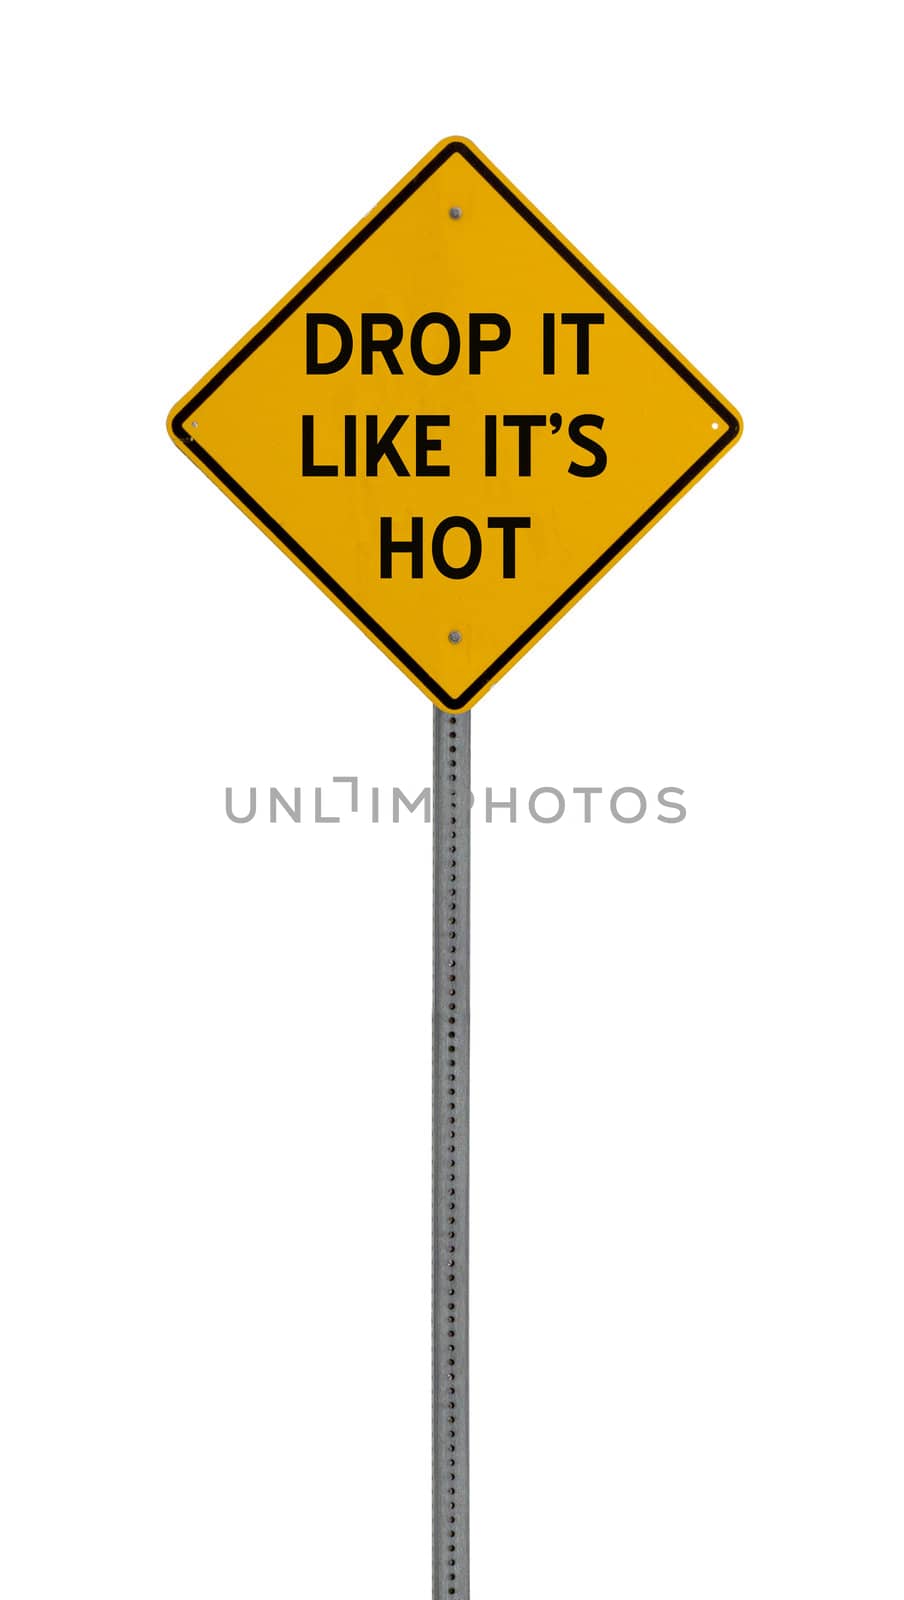 a yellow road sign with a white background for you to use in your design or presentaion.